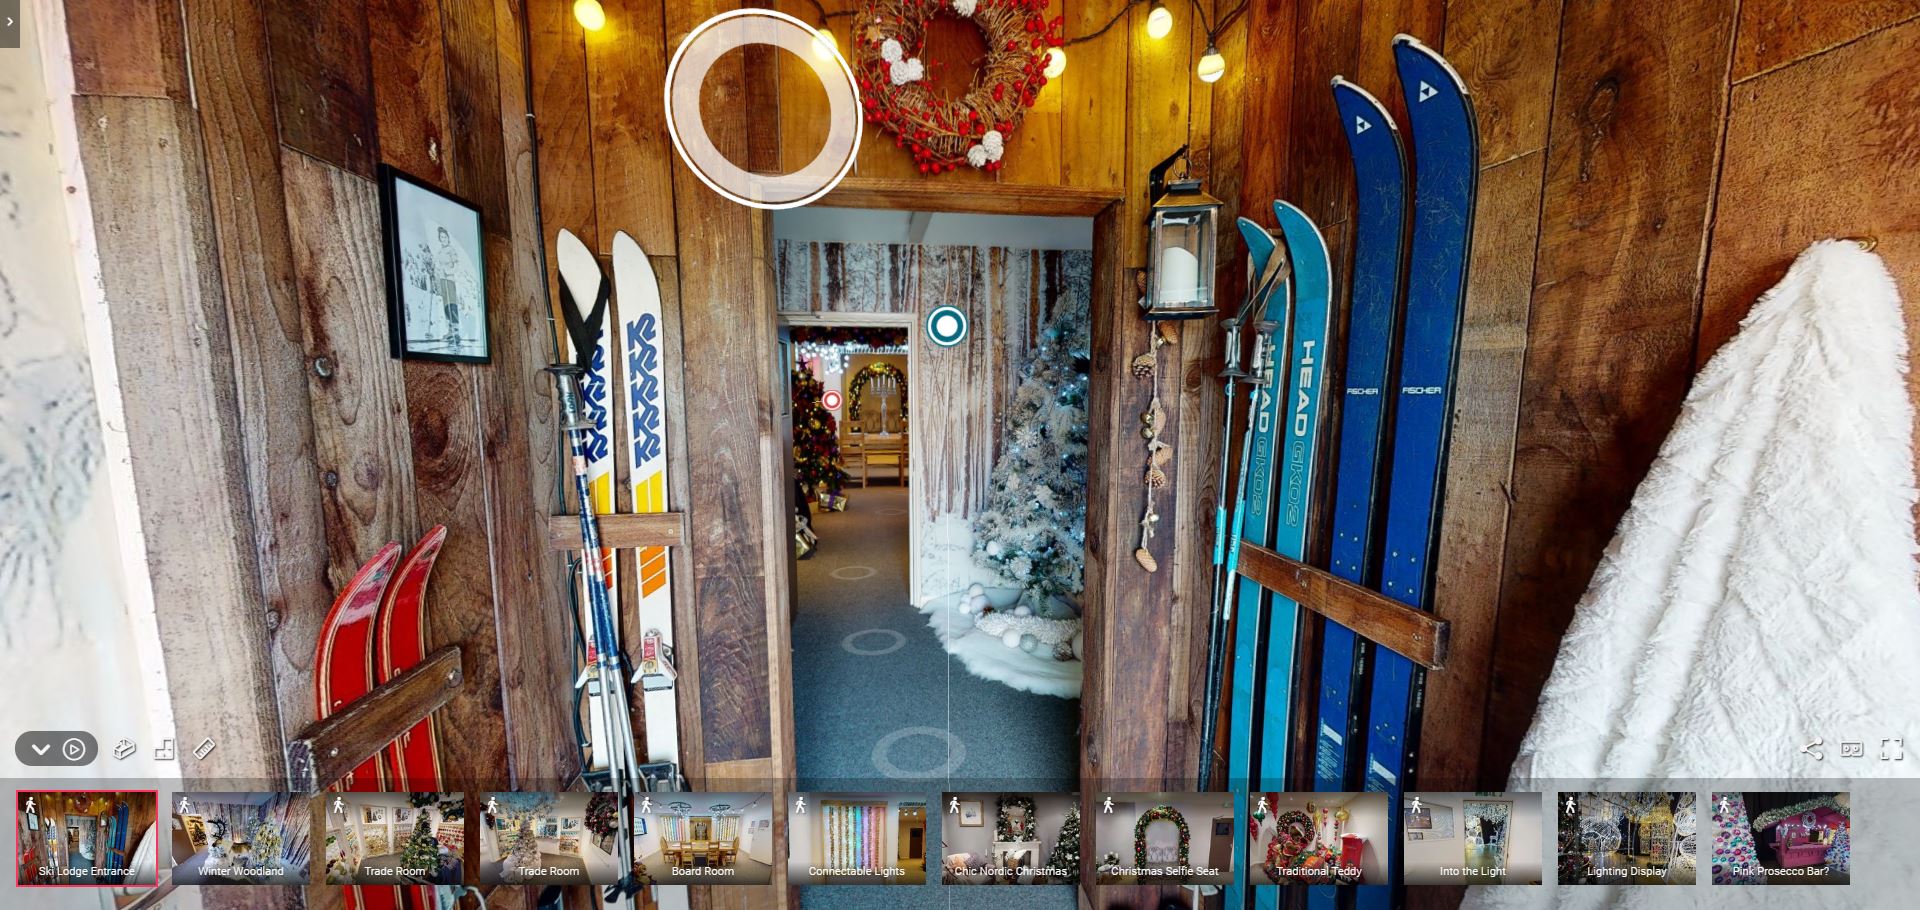 A still image from Fizzco's online Christmas showroom tour, showing the entrance of the showroom with skis attached to the wooden wall.